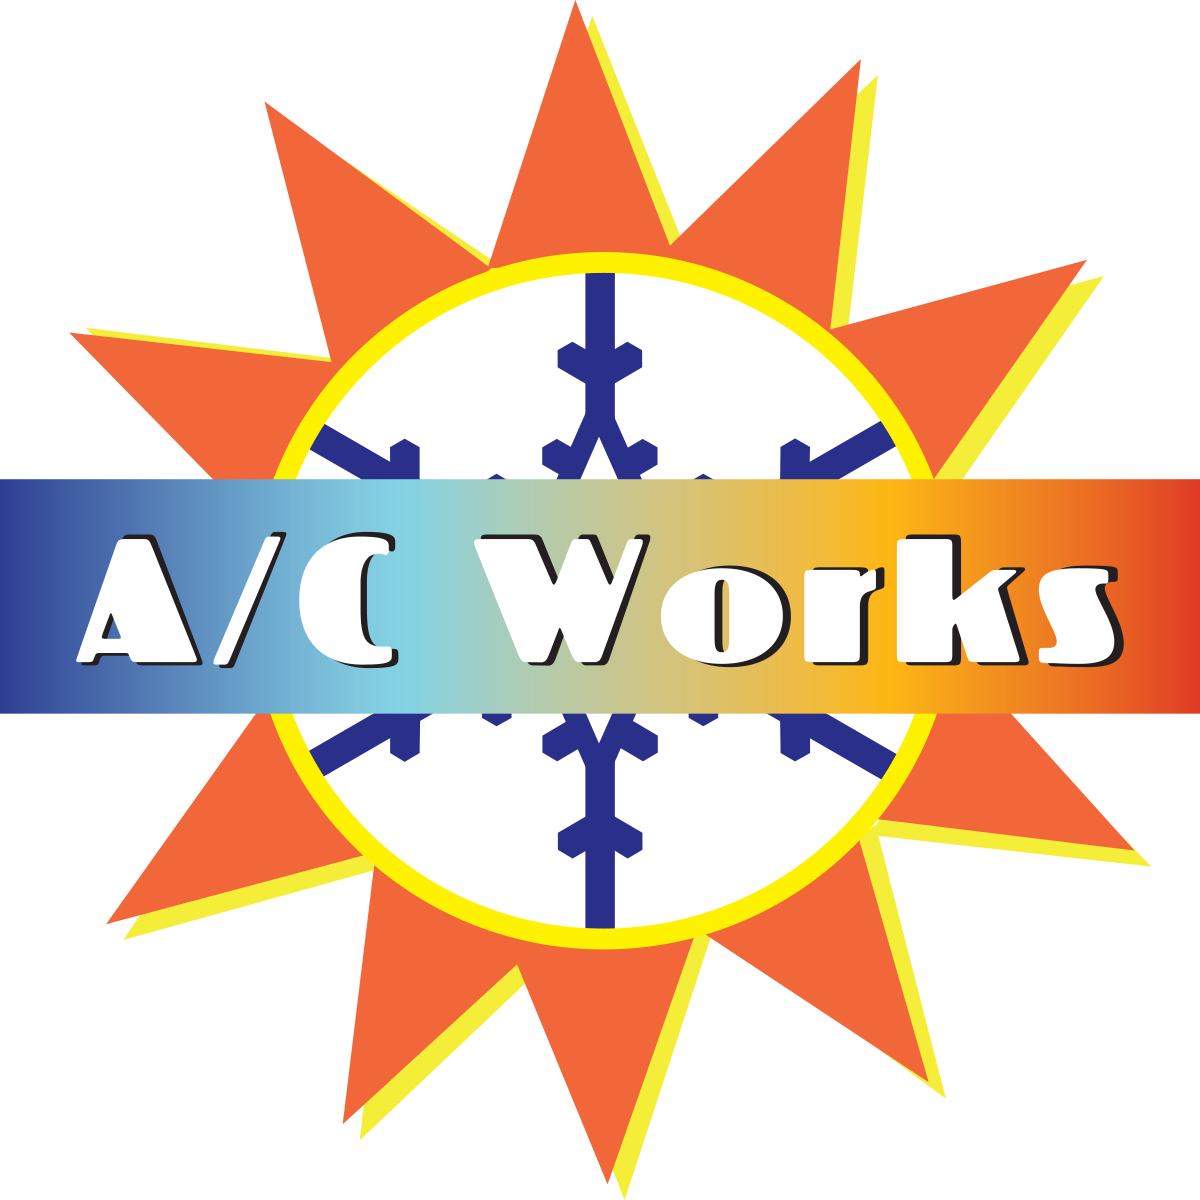 A/C Works